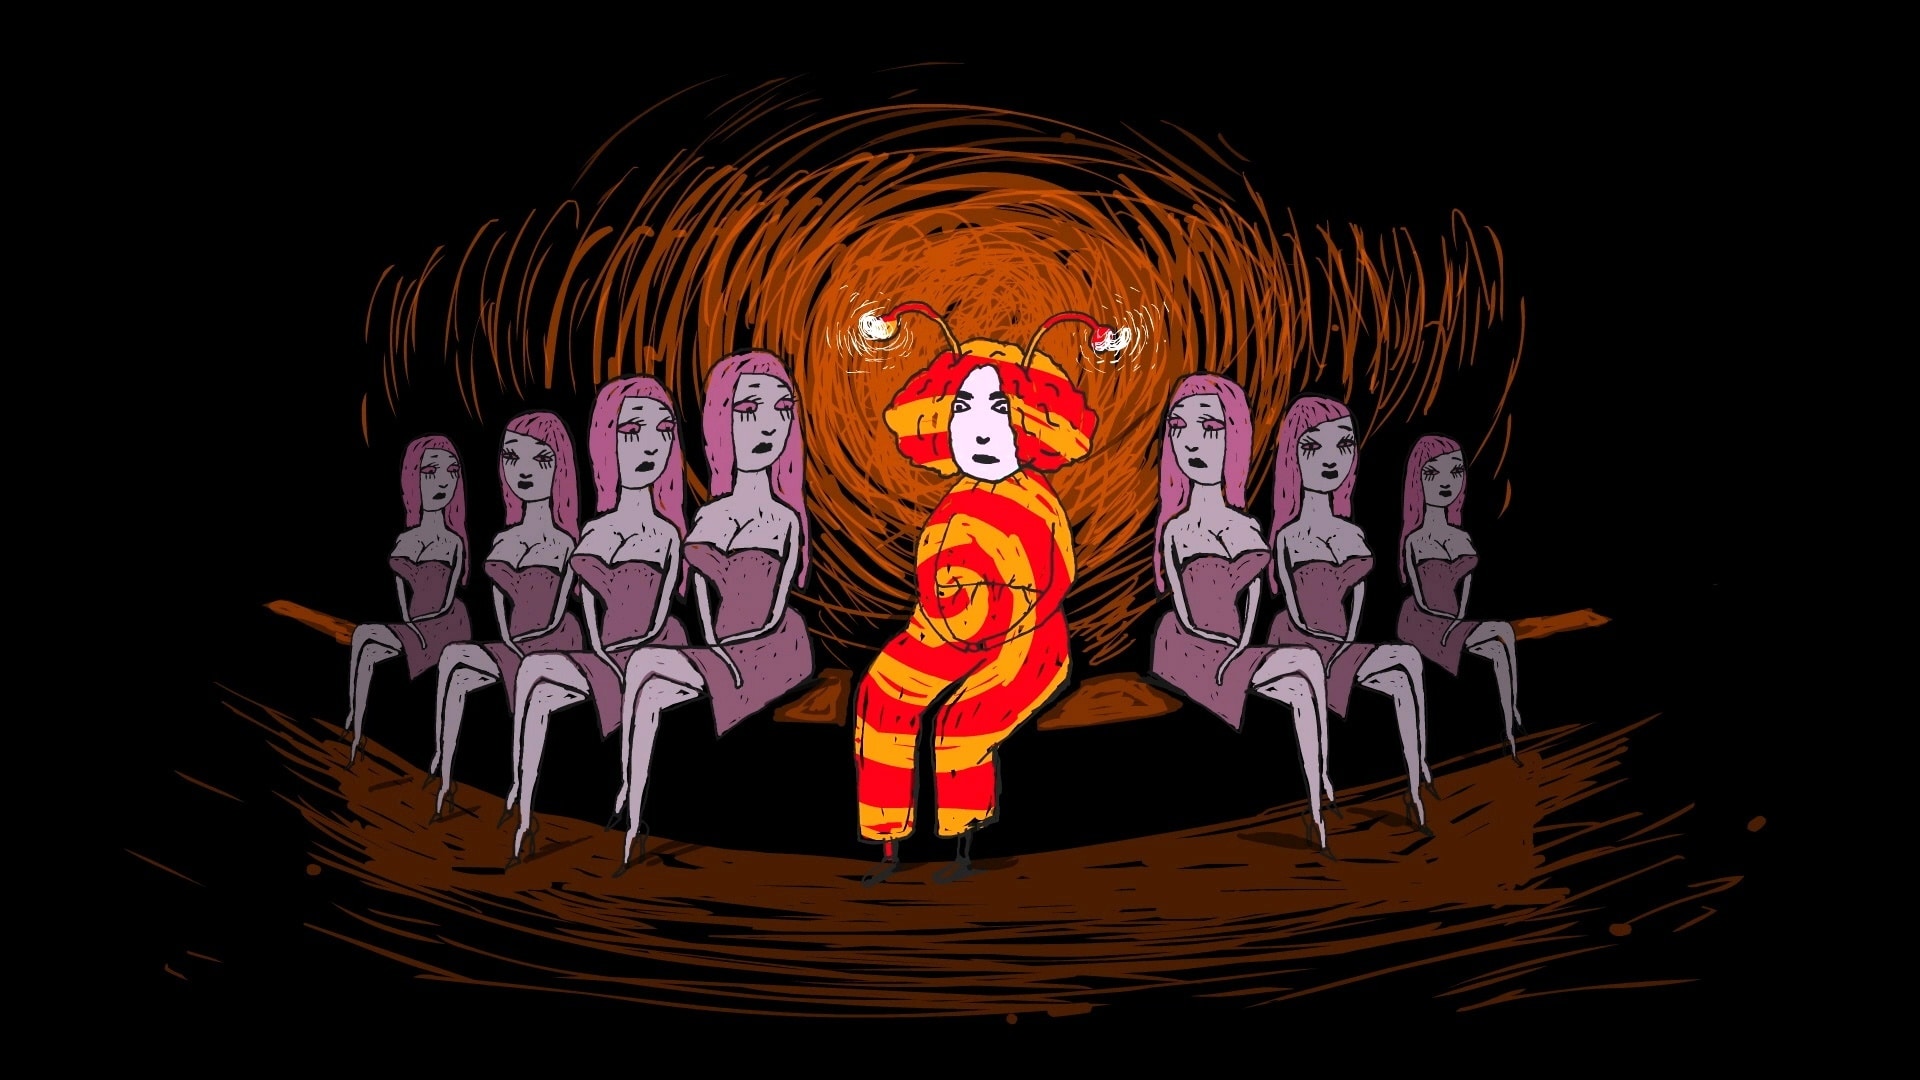 Image of a shot from an animated film with a cartoon-style woman in red & orange being stared at by identical women in purple.